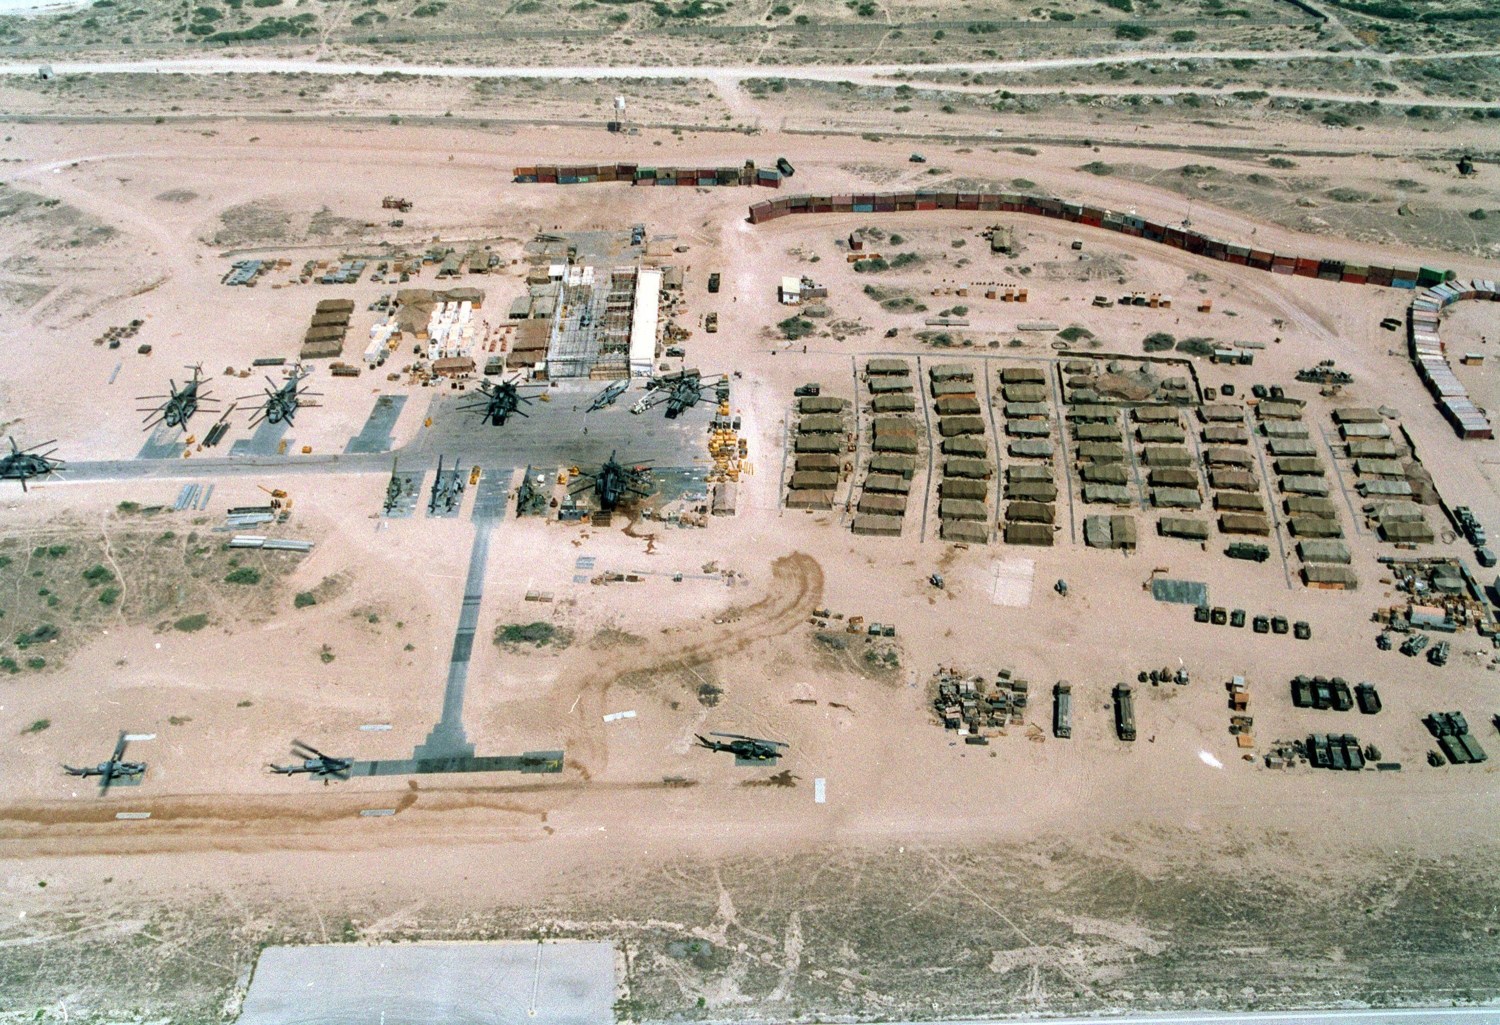 Base of the U.N. mostly U.S. Marine Forces in Somalia was built on an abandoned Soviet airfield in Mogadishu. Had a wall of shipping containers upper right to thwart random sniper fire. Feb. 25 1993.